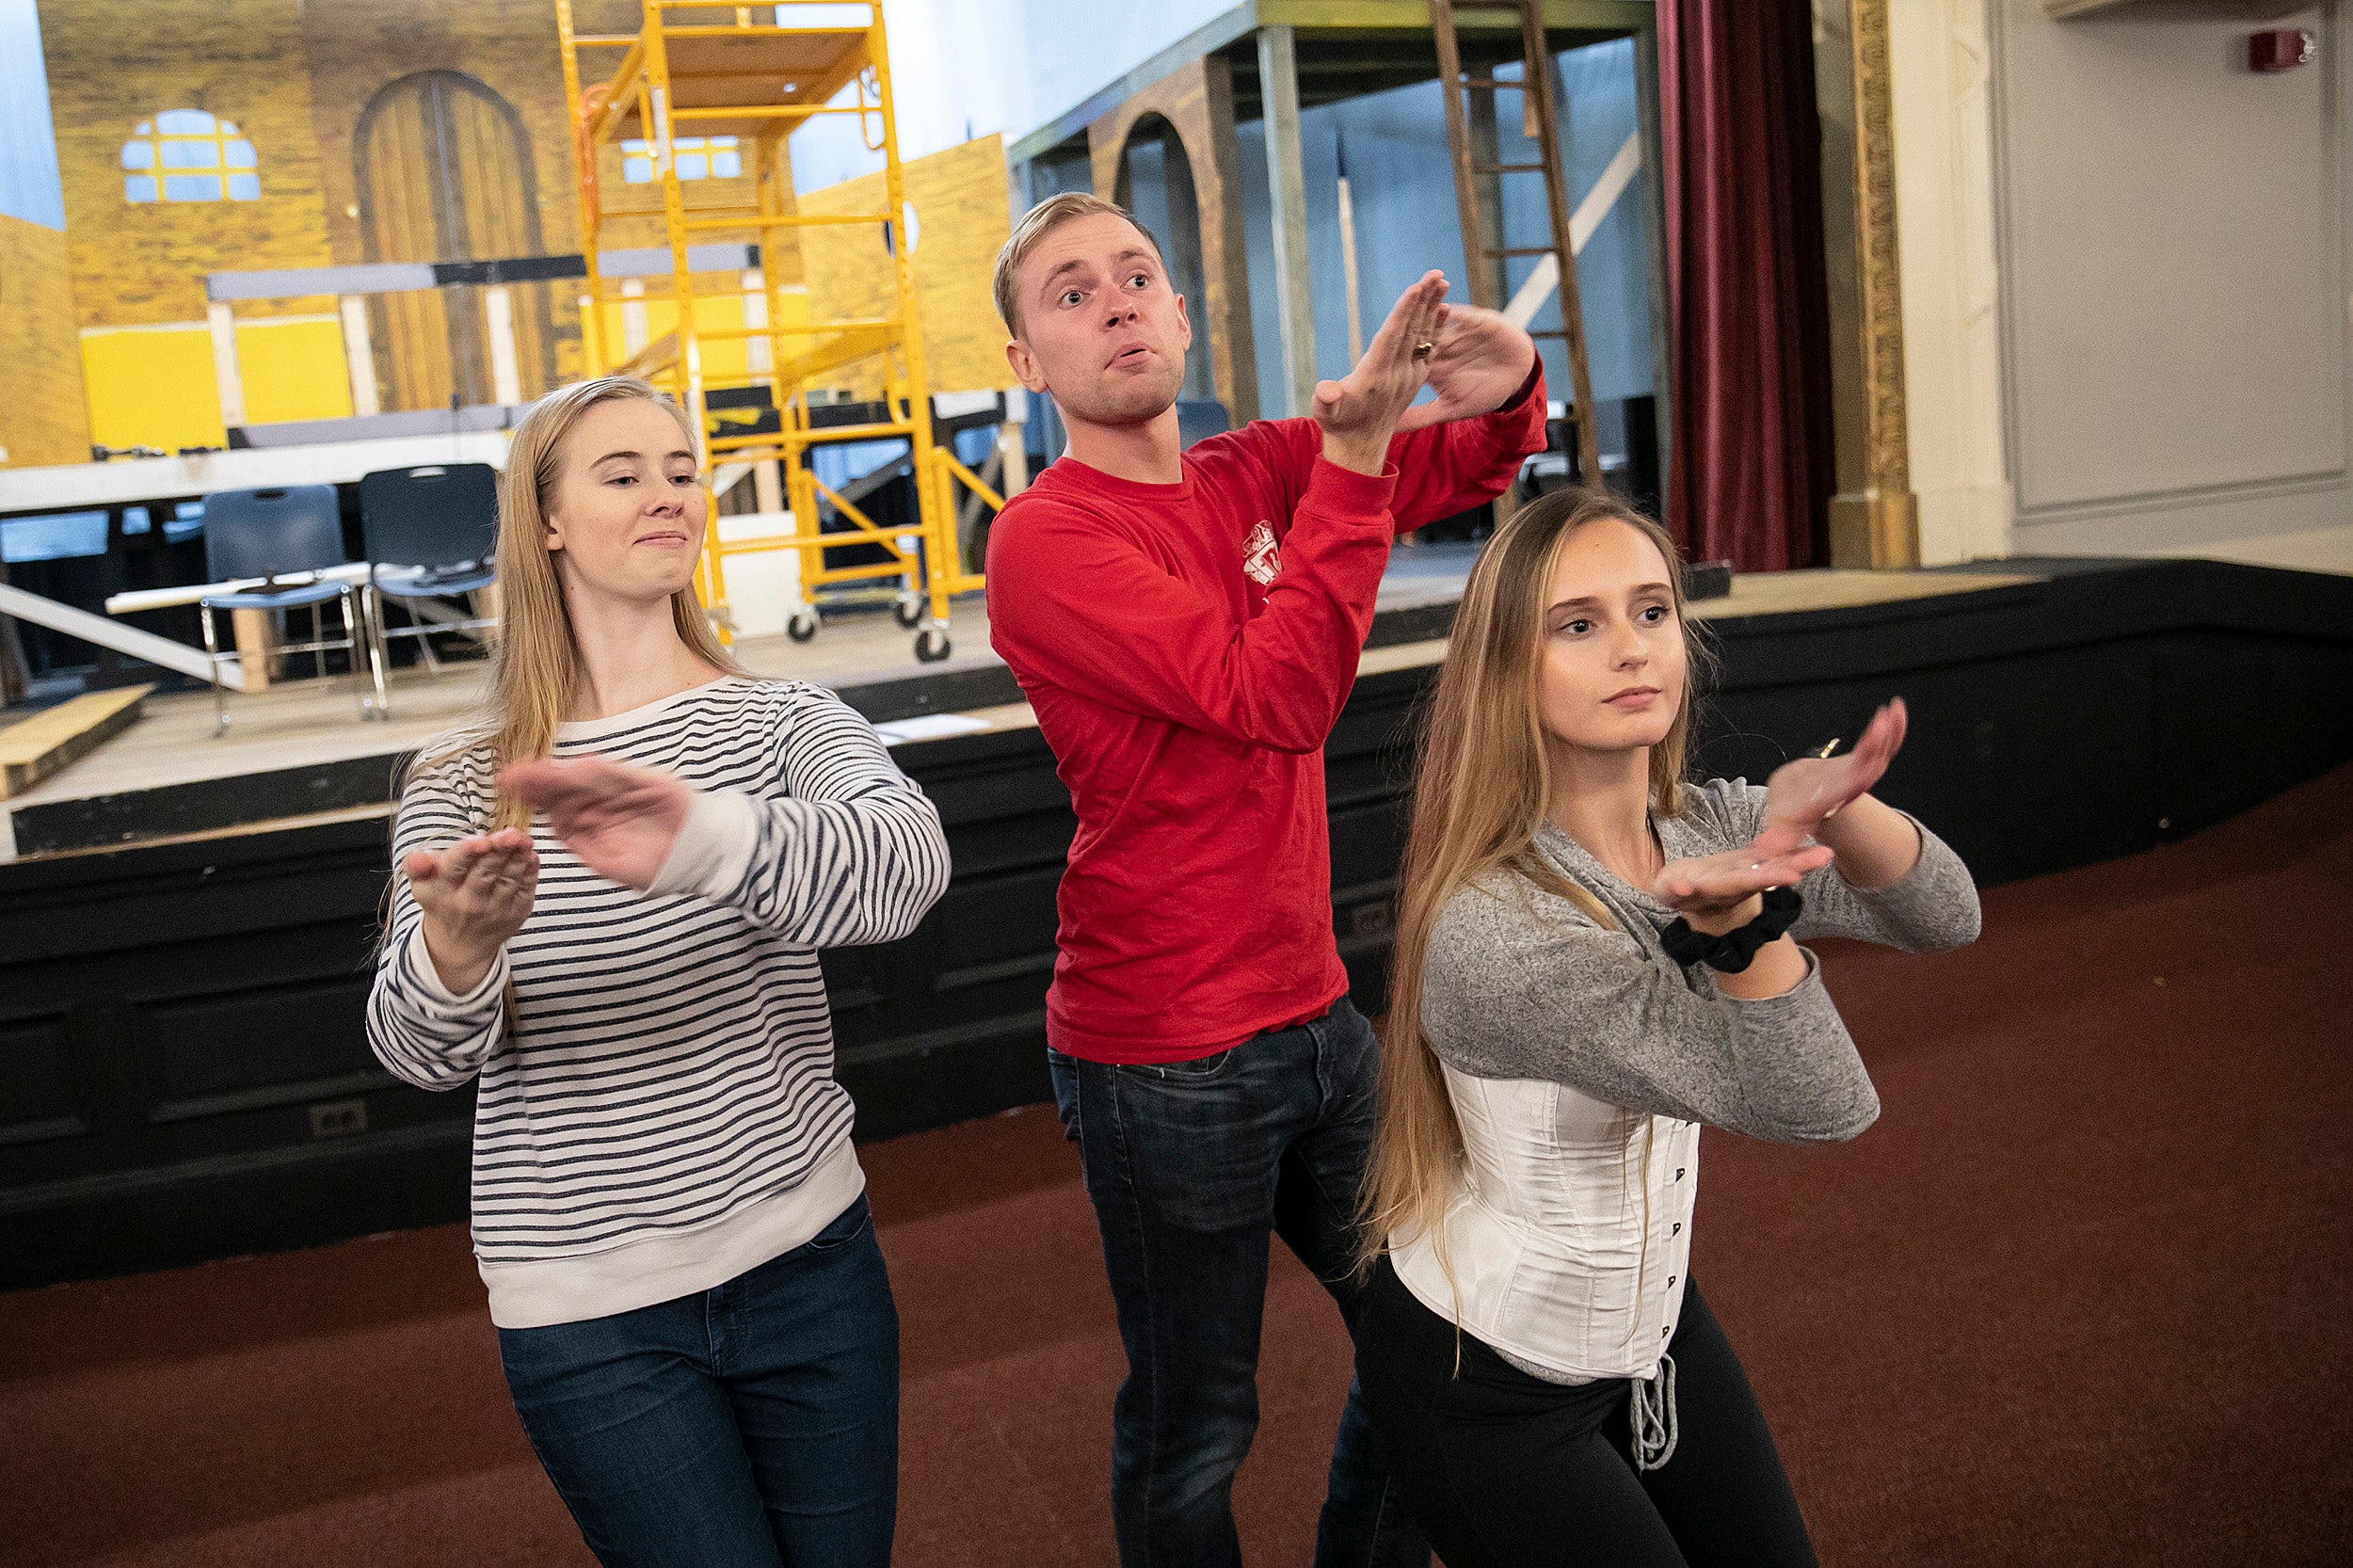 Three cast members pose during rehearsal